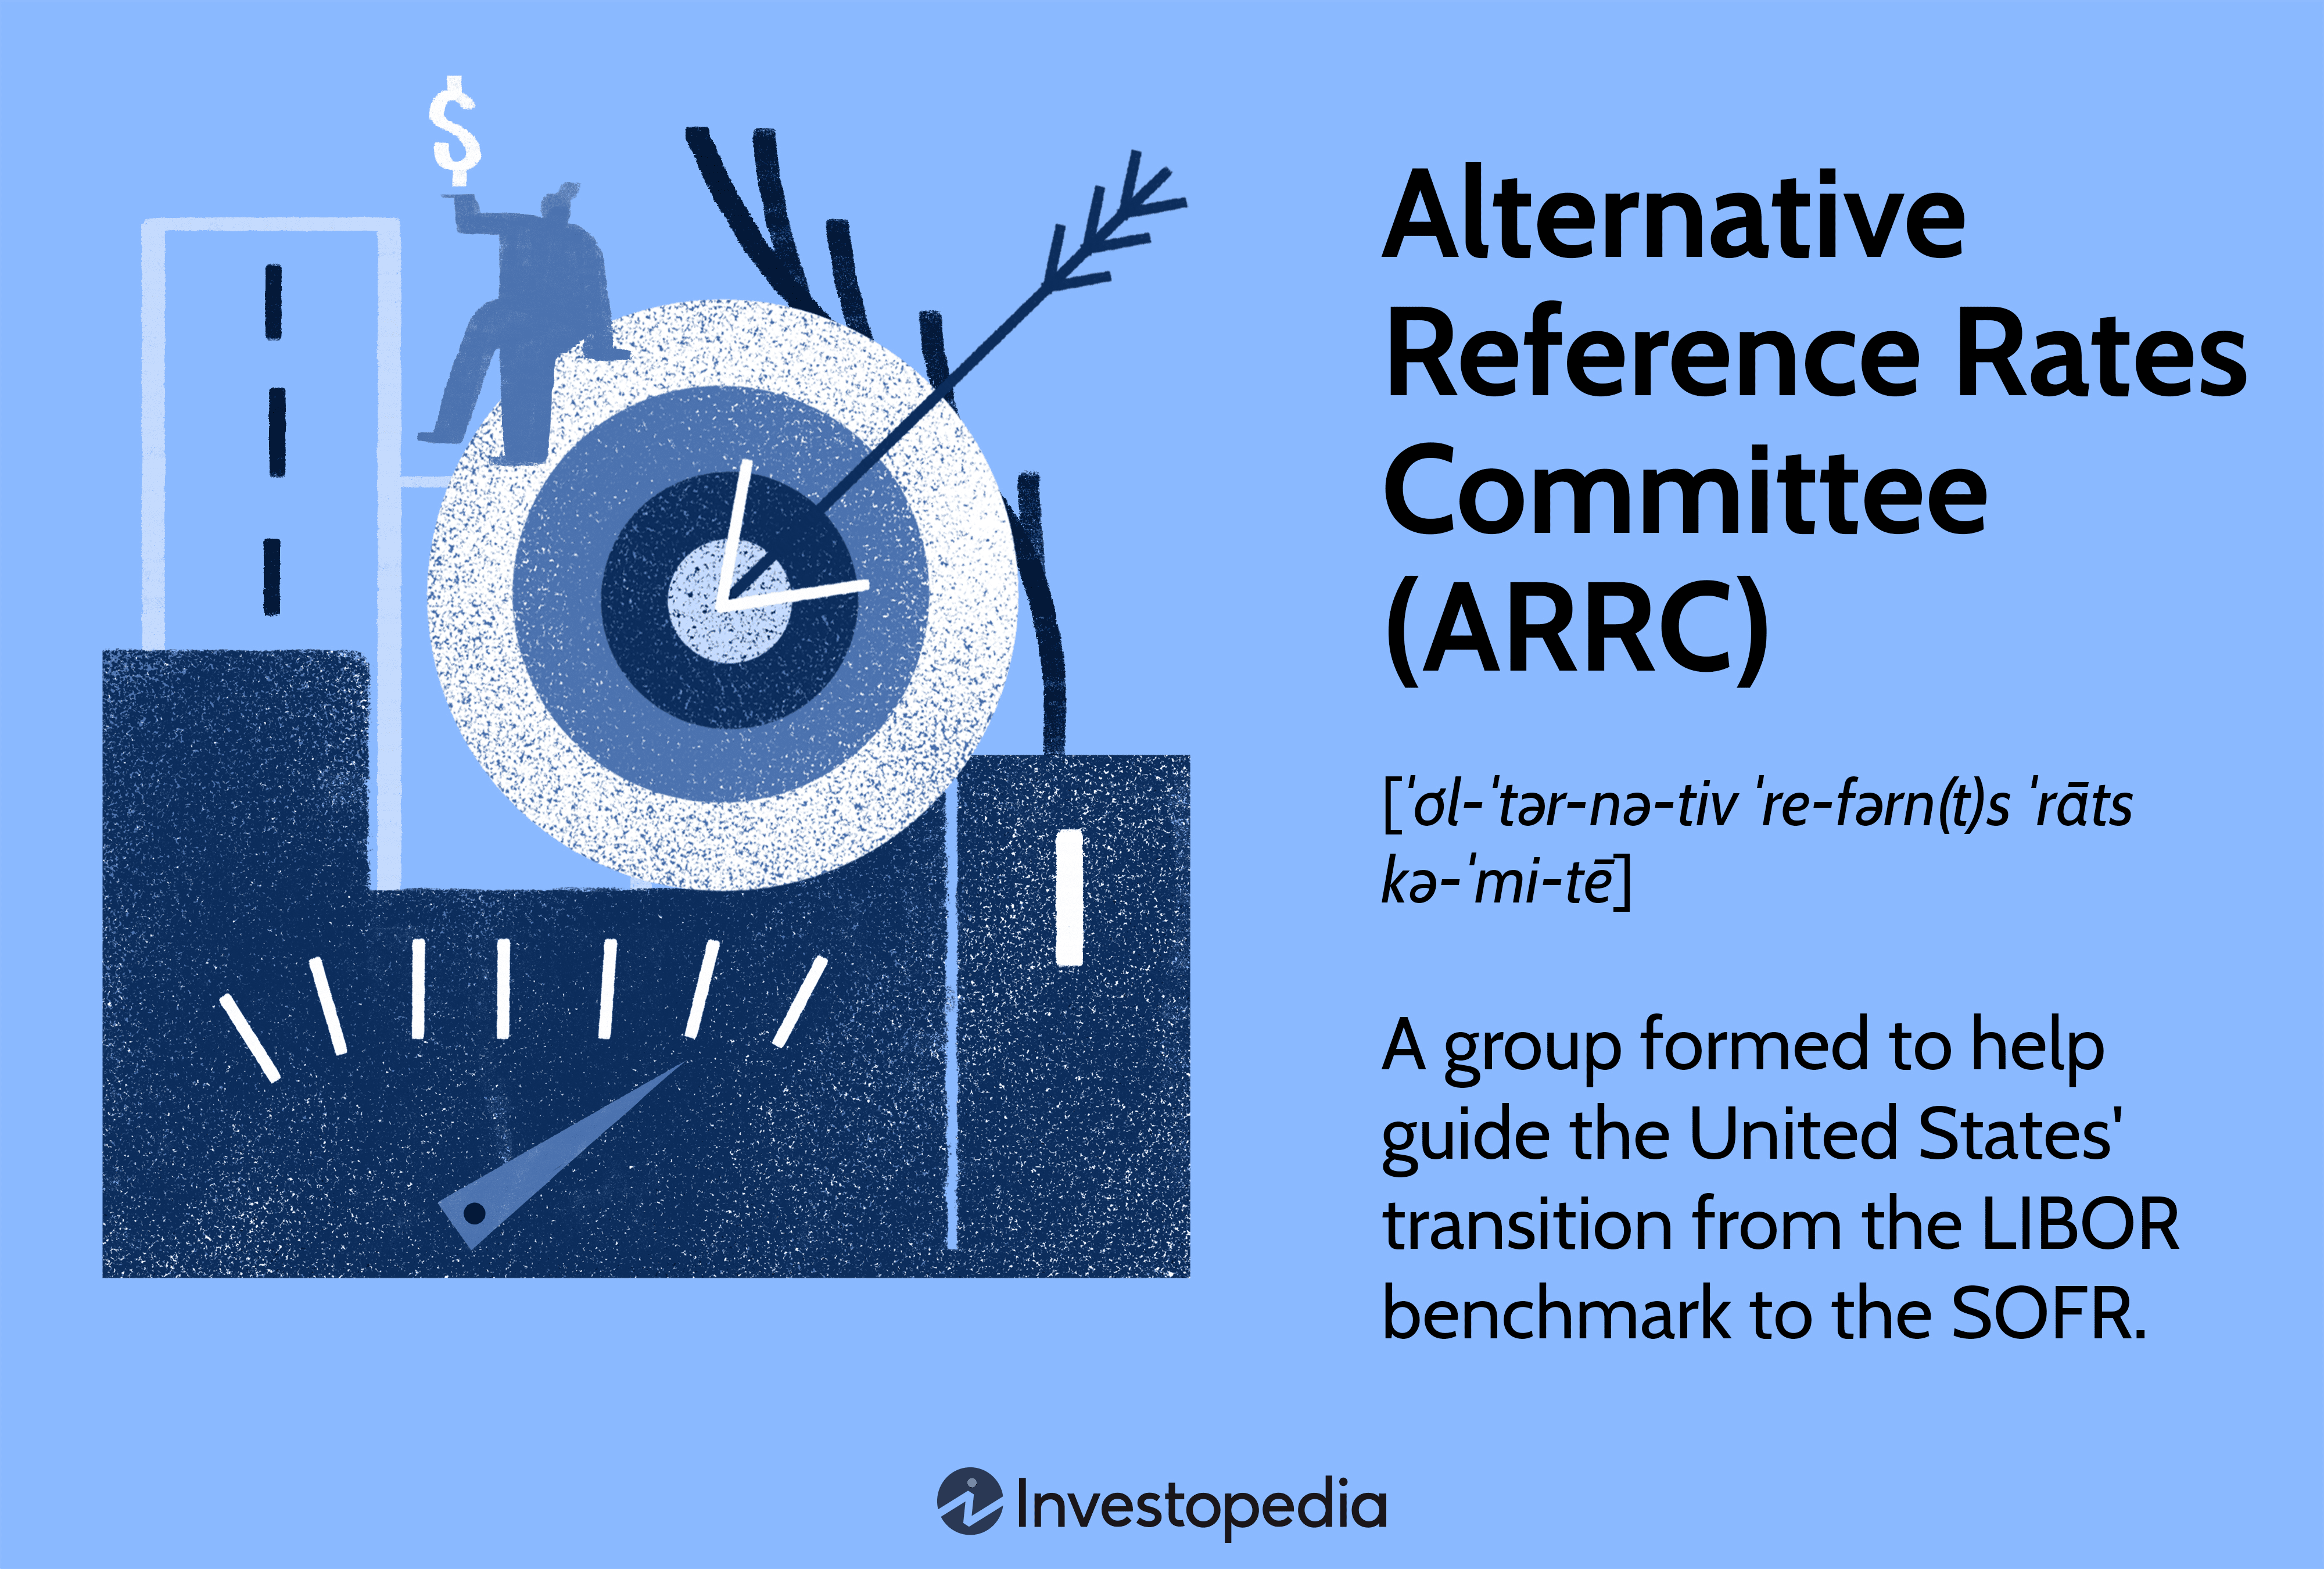 Alternative Reference Rates Committee (ARRC)